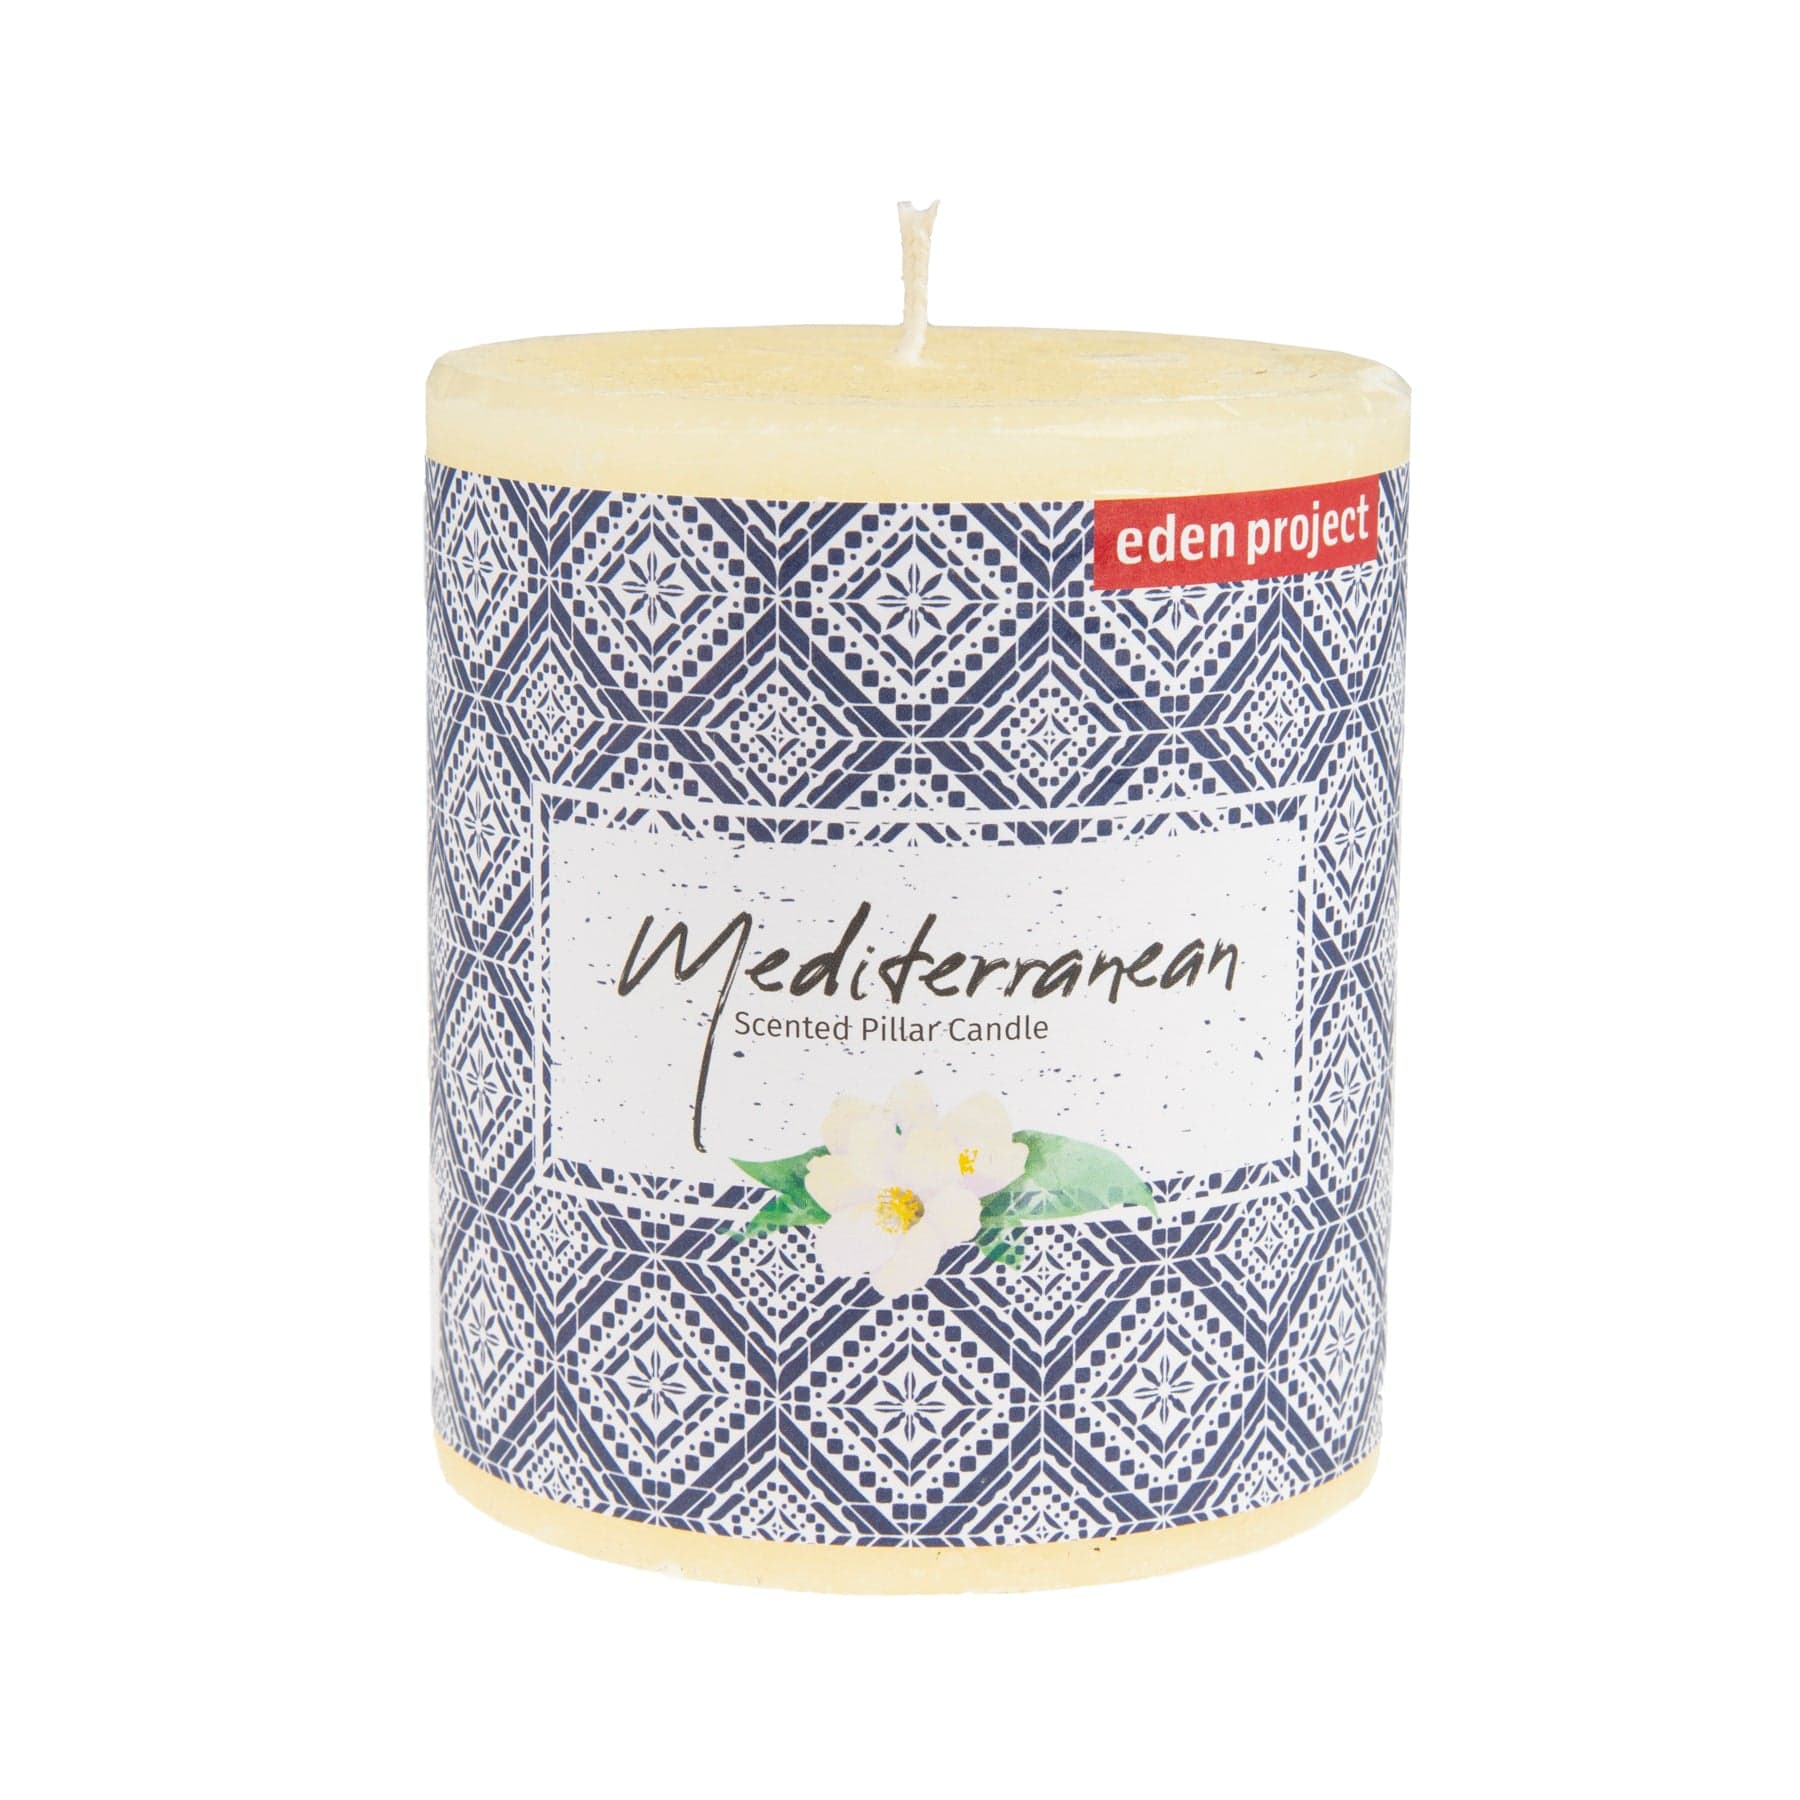 Eden Project Mediterranean scented pillar candle with ornate blue and white geometric pattern design and flower illustration on label.